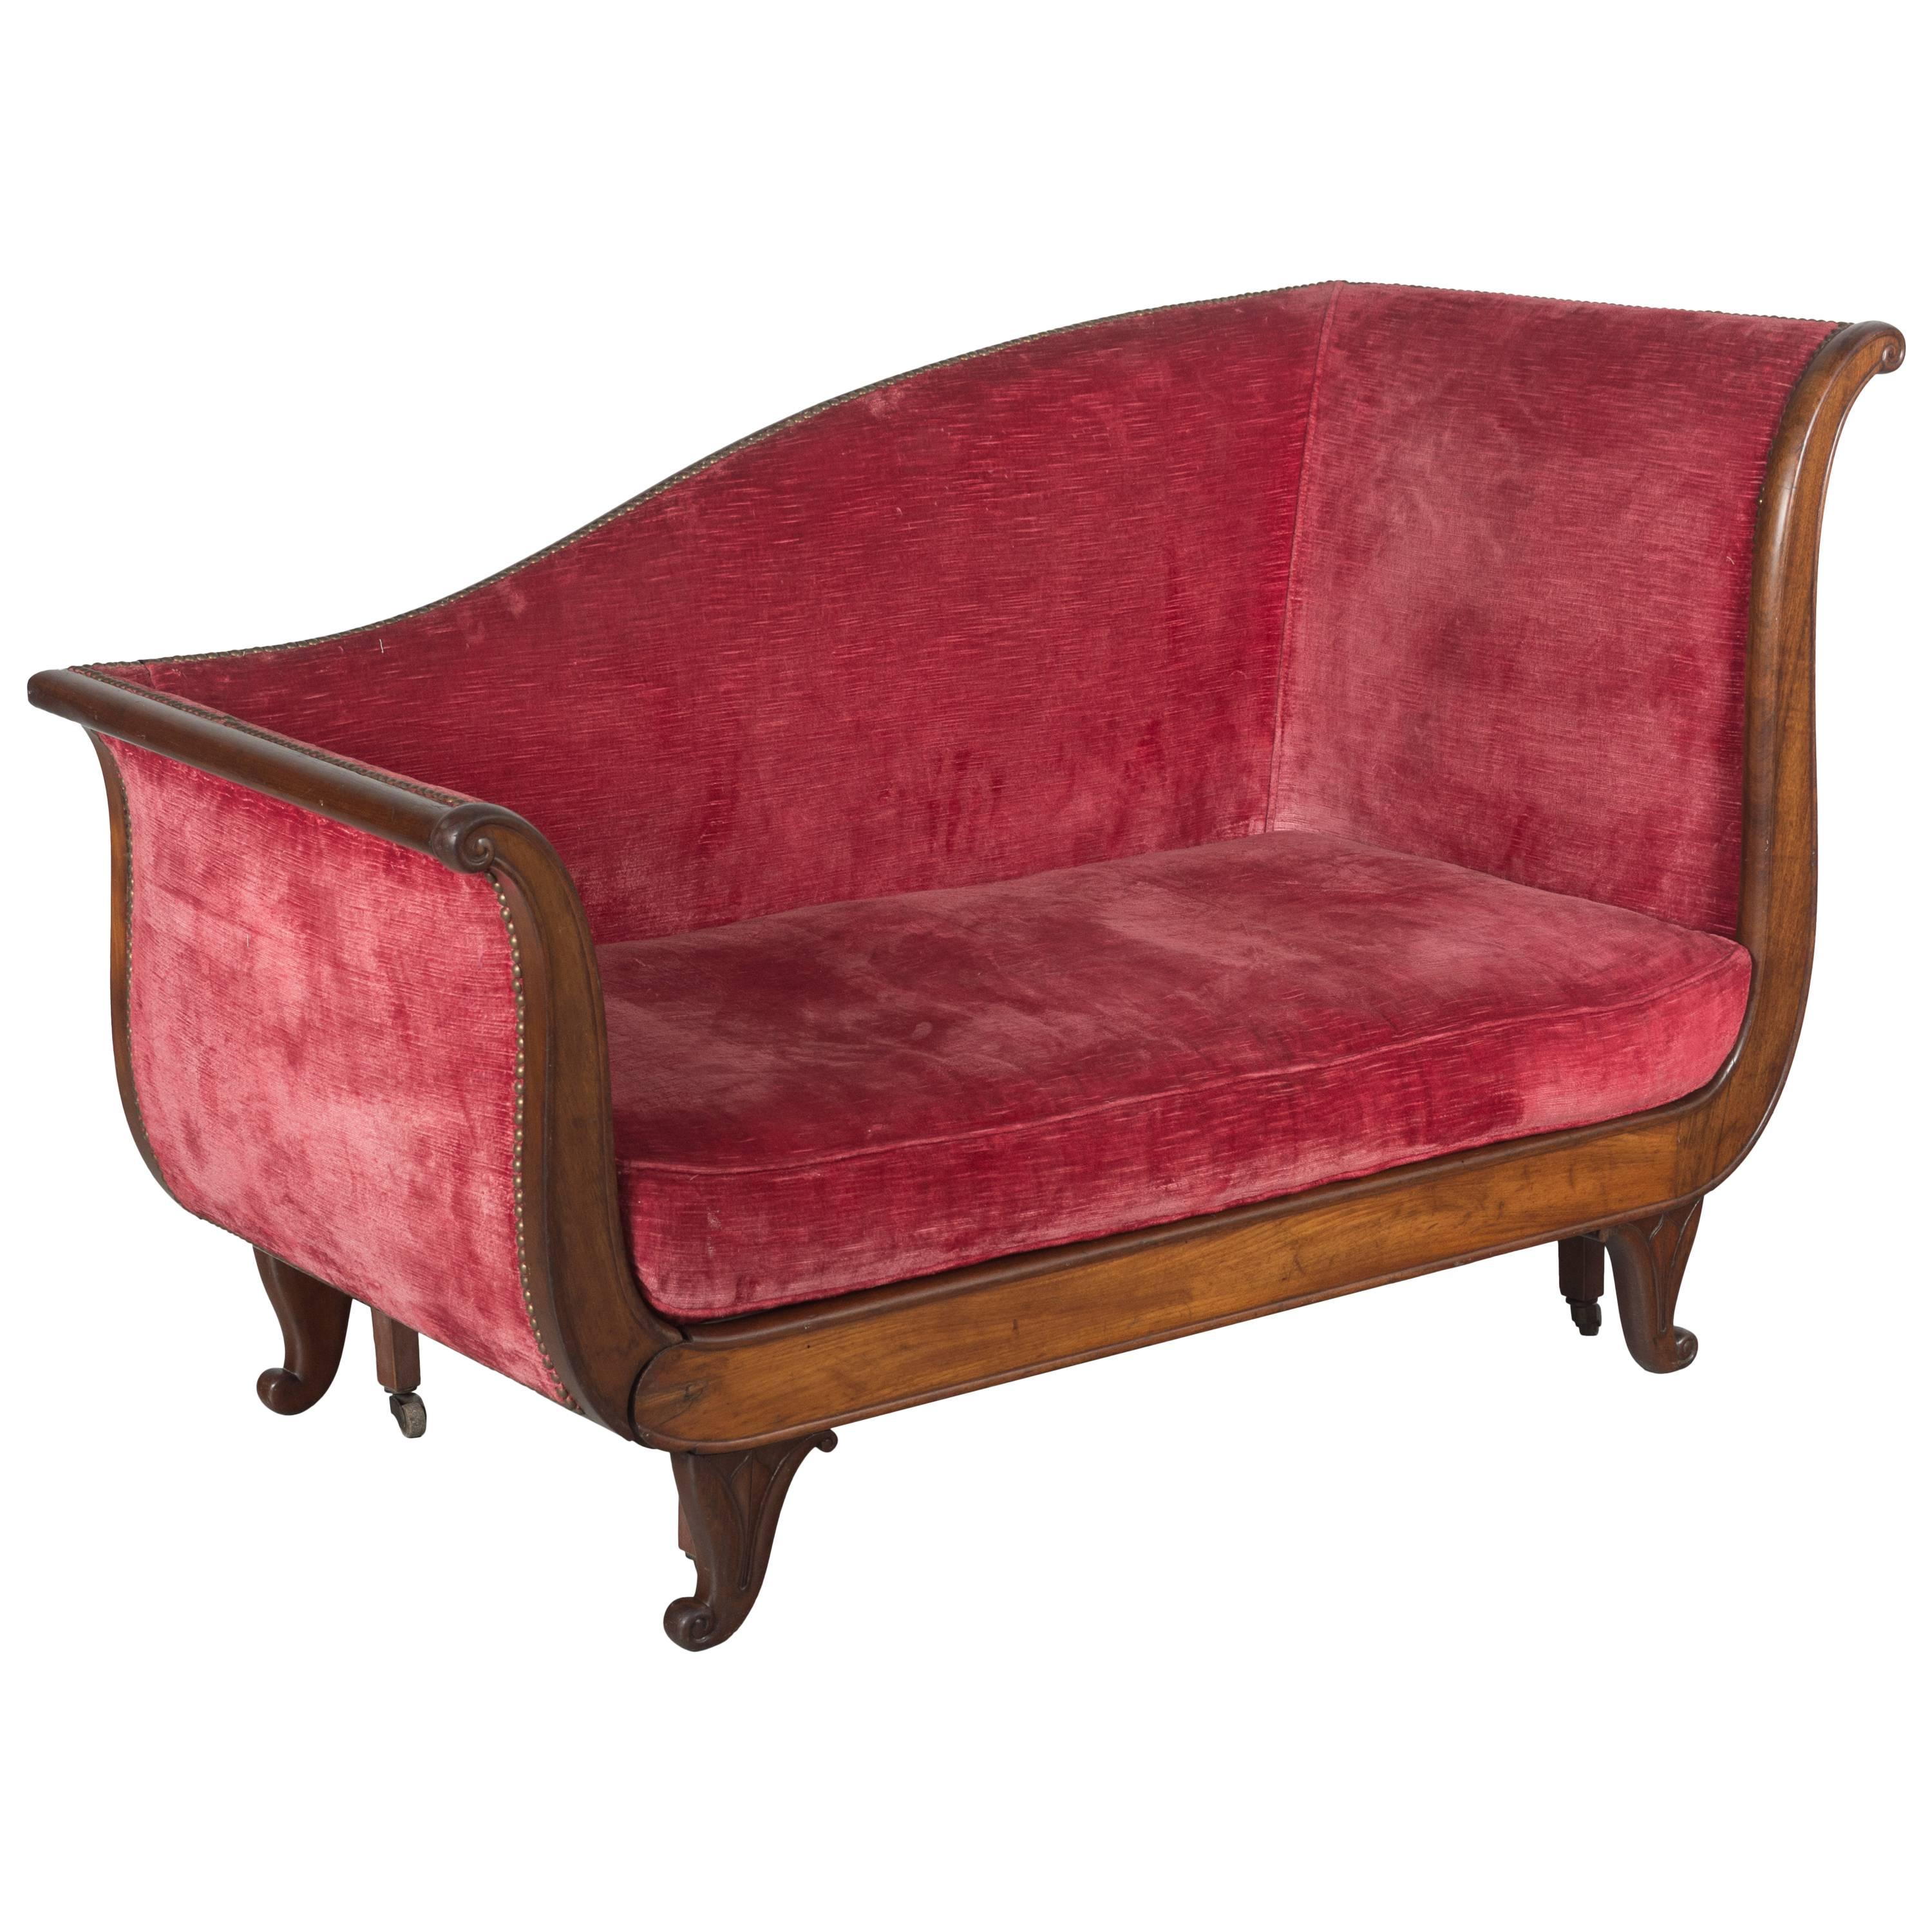 19th Century French Empire Style Settee